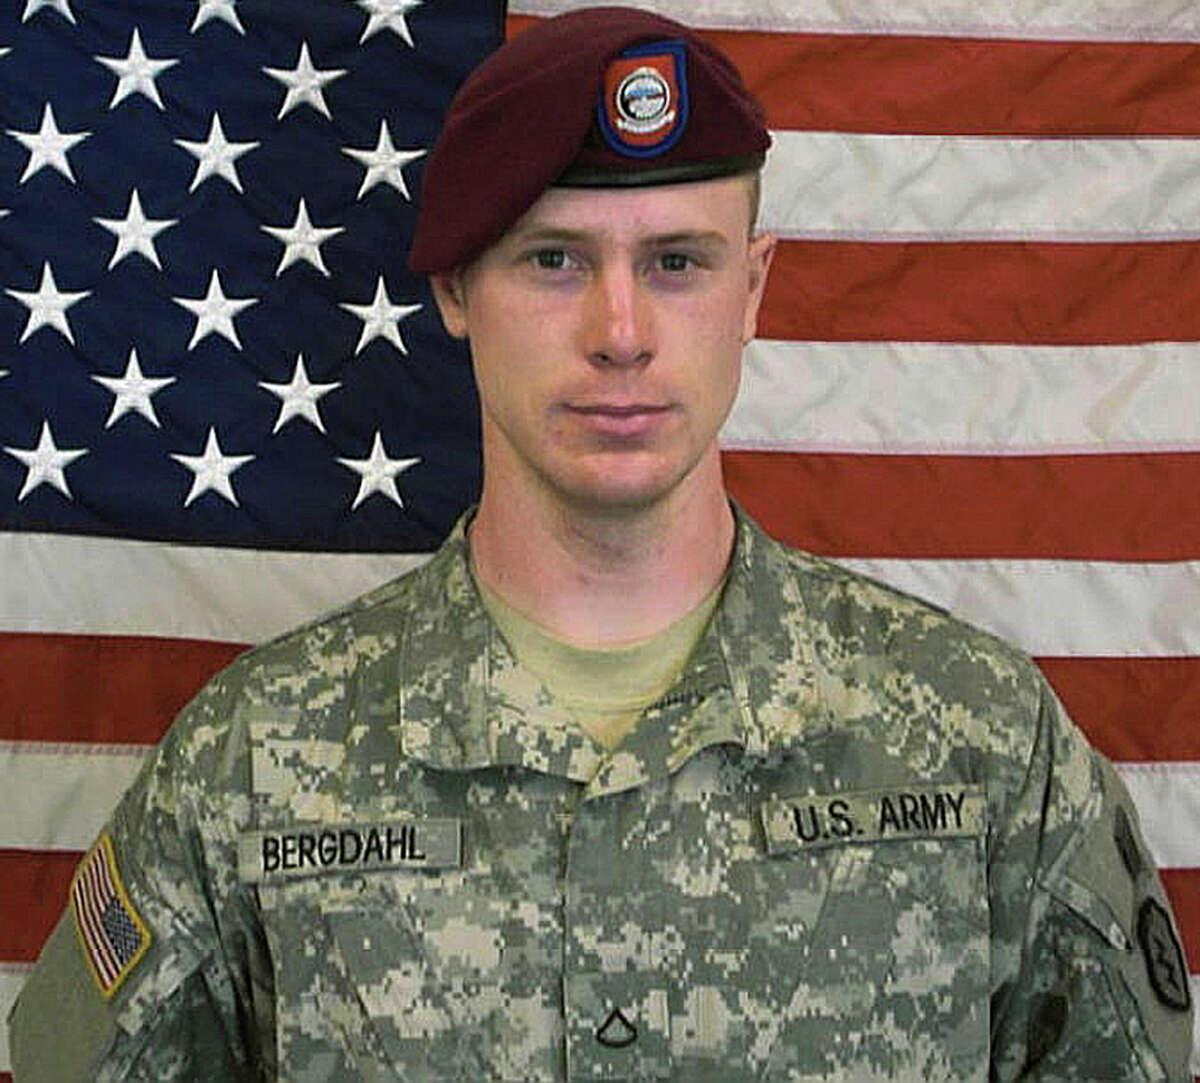 Sgt. Bowe Bergdahl was released in 2014 after spending about five years as a prisoner of the Taliban in Afghanistan.